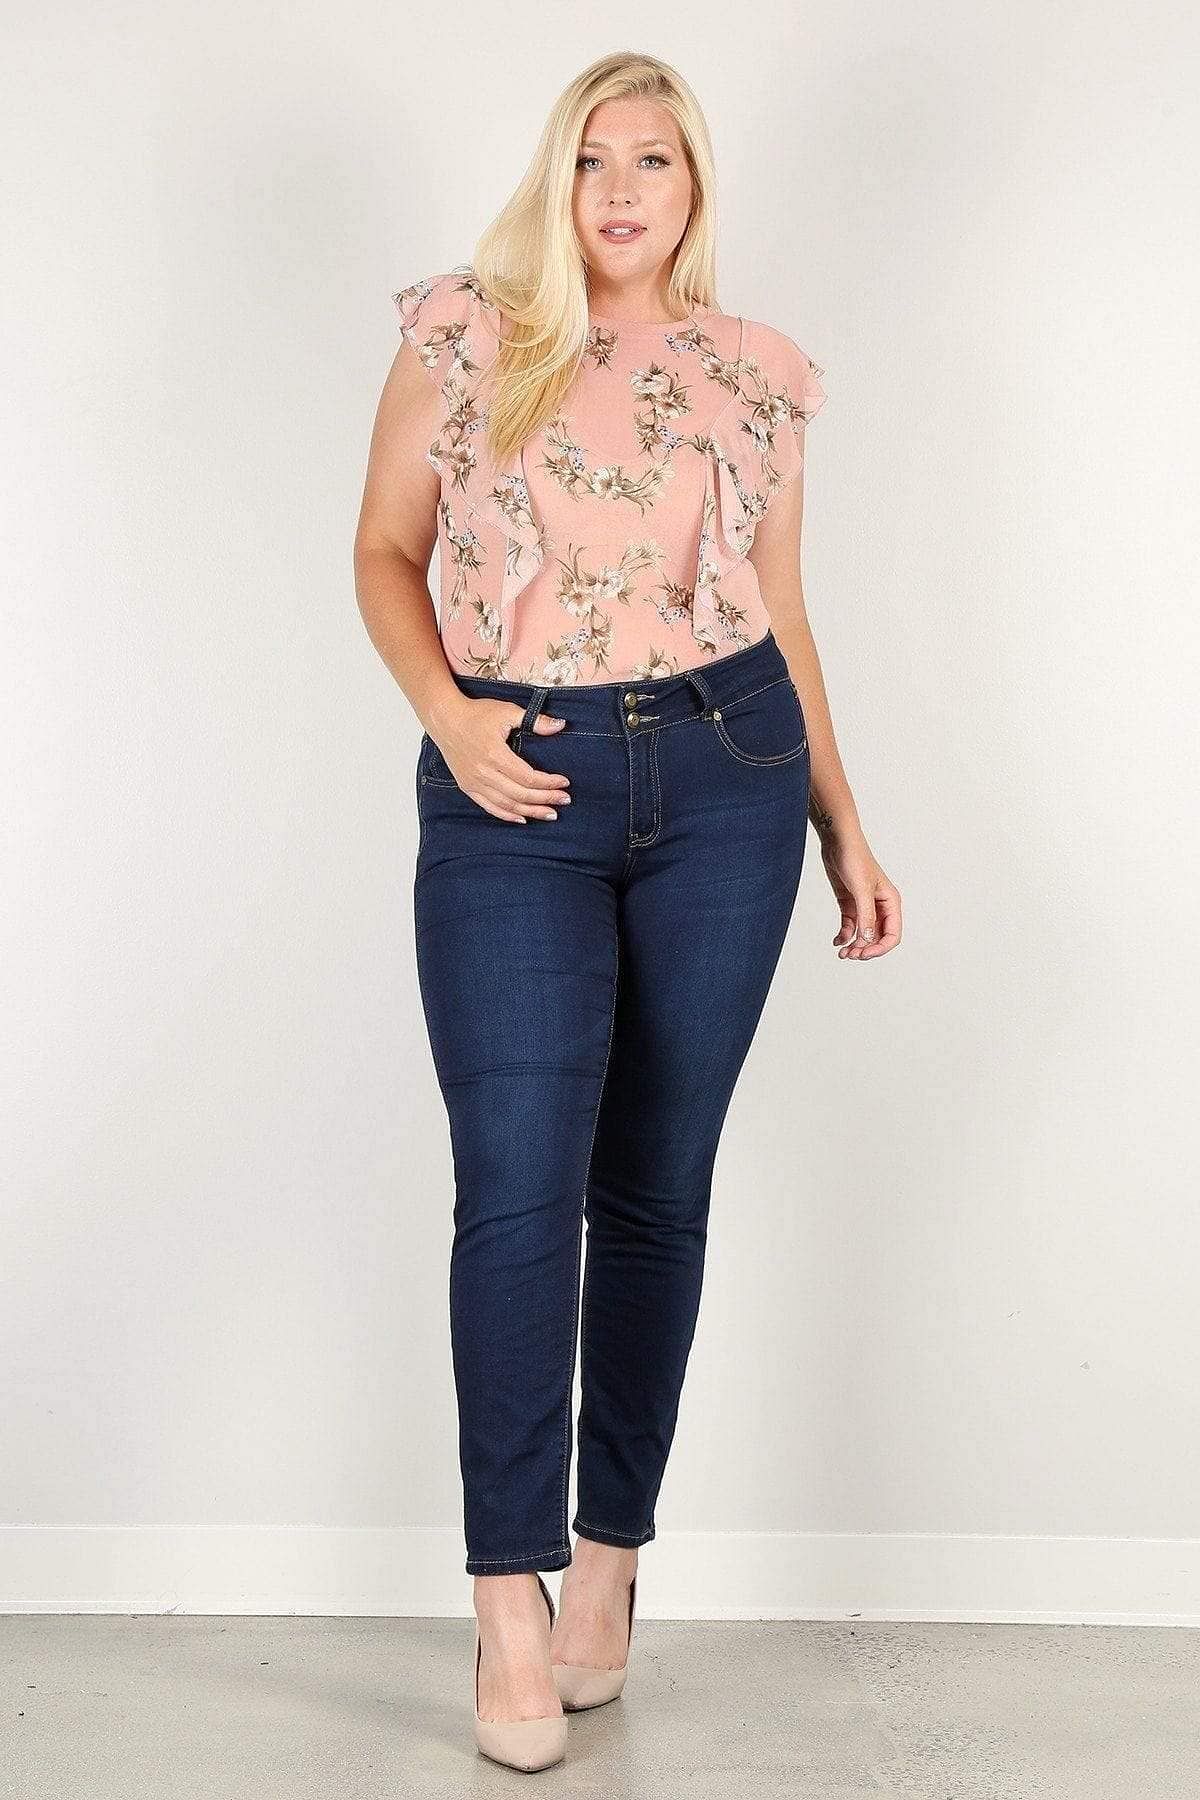 Pink Short Sleeve Floral Top - Shopping Therapy 1XL Top